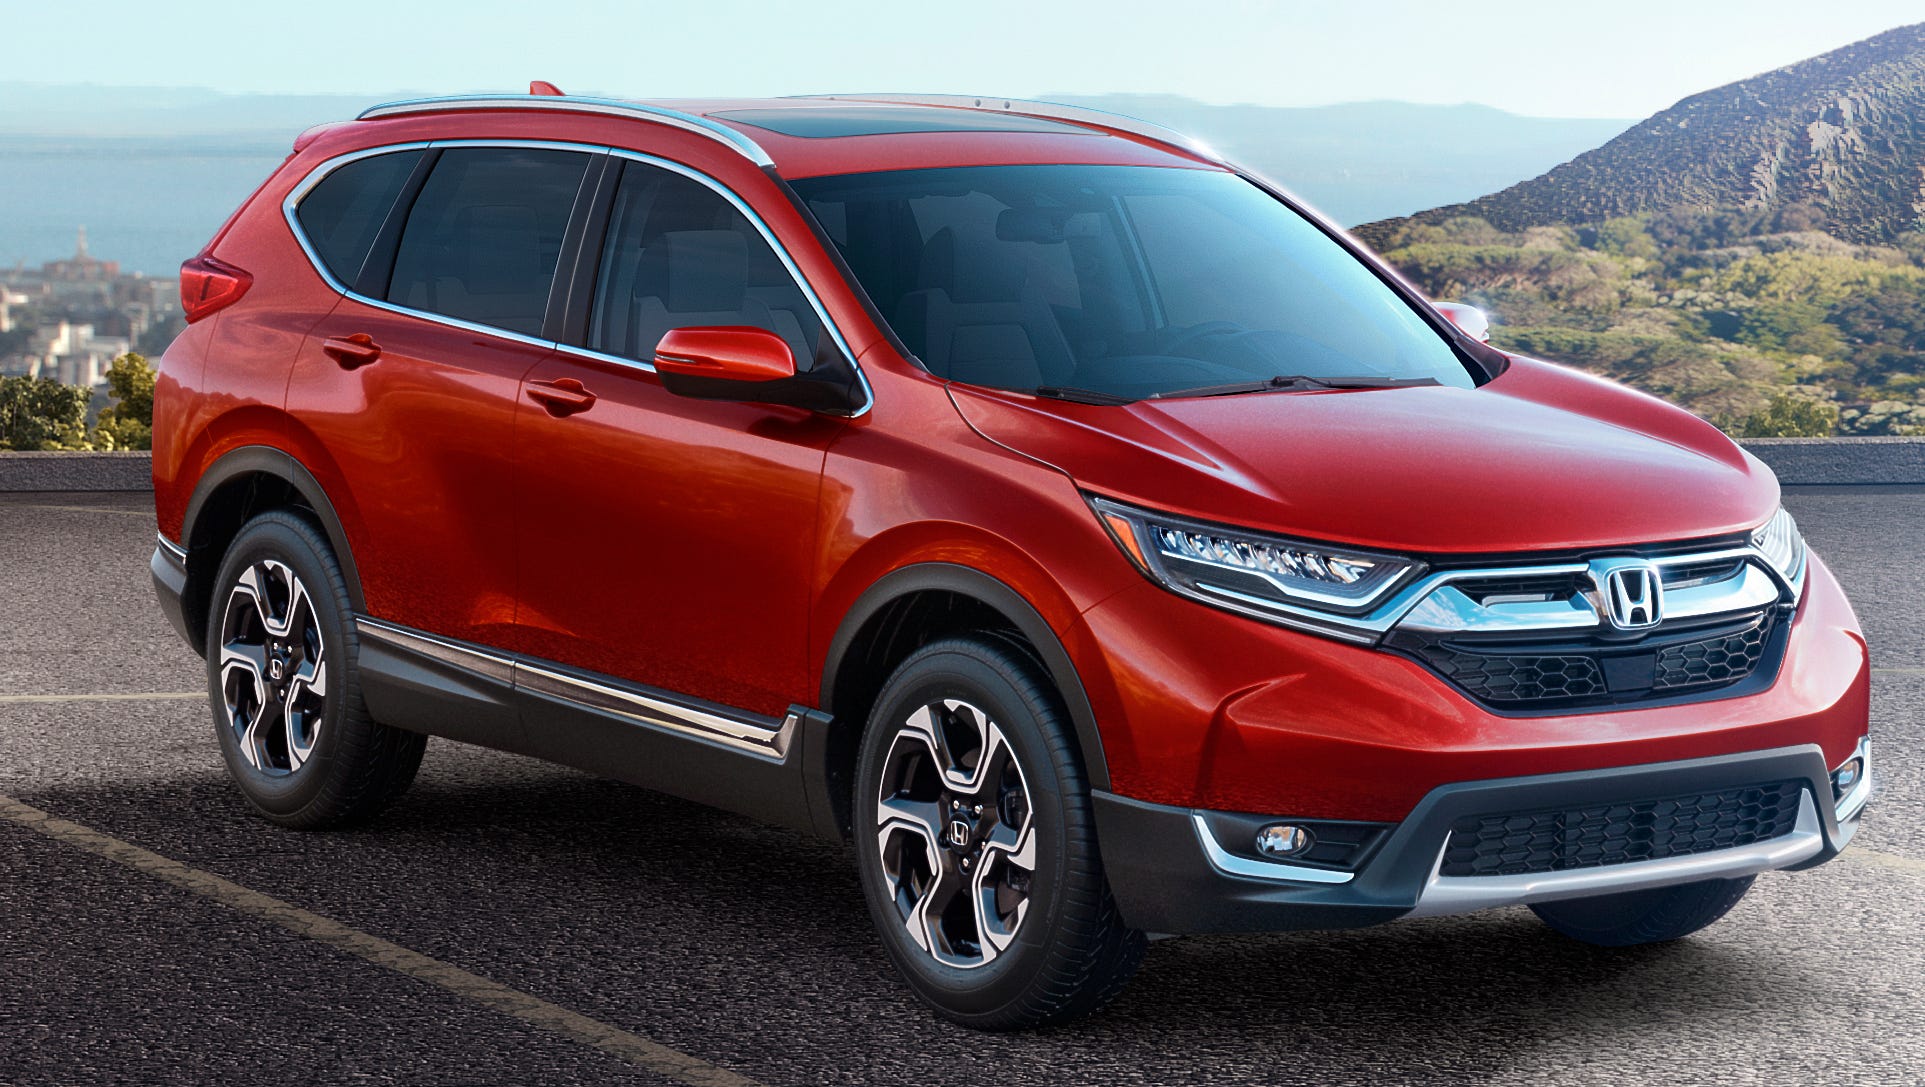 Honda unveils larger, more powerful CR-V compact SUV